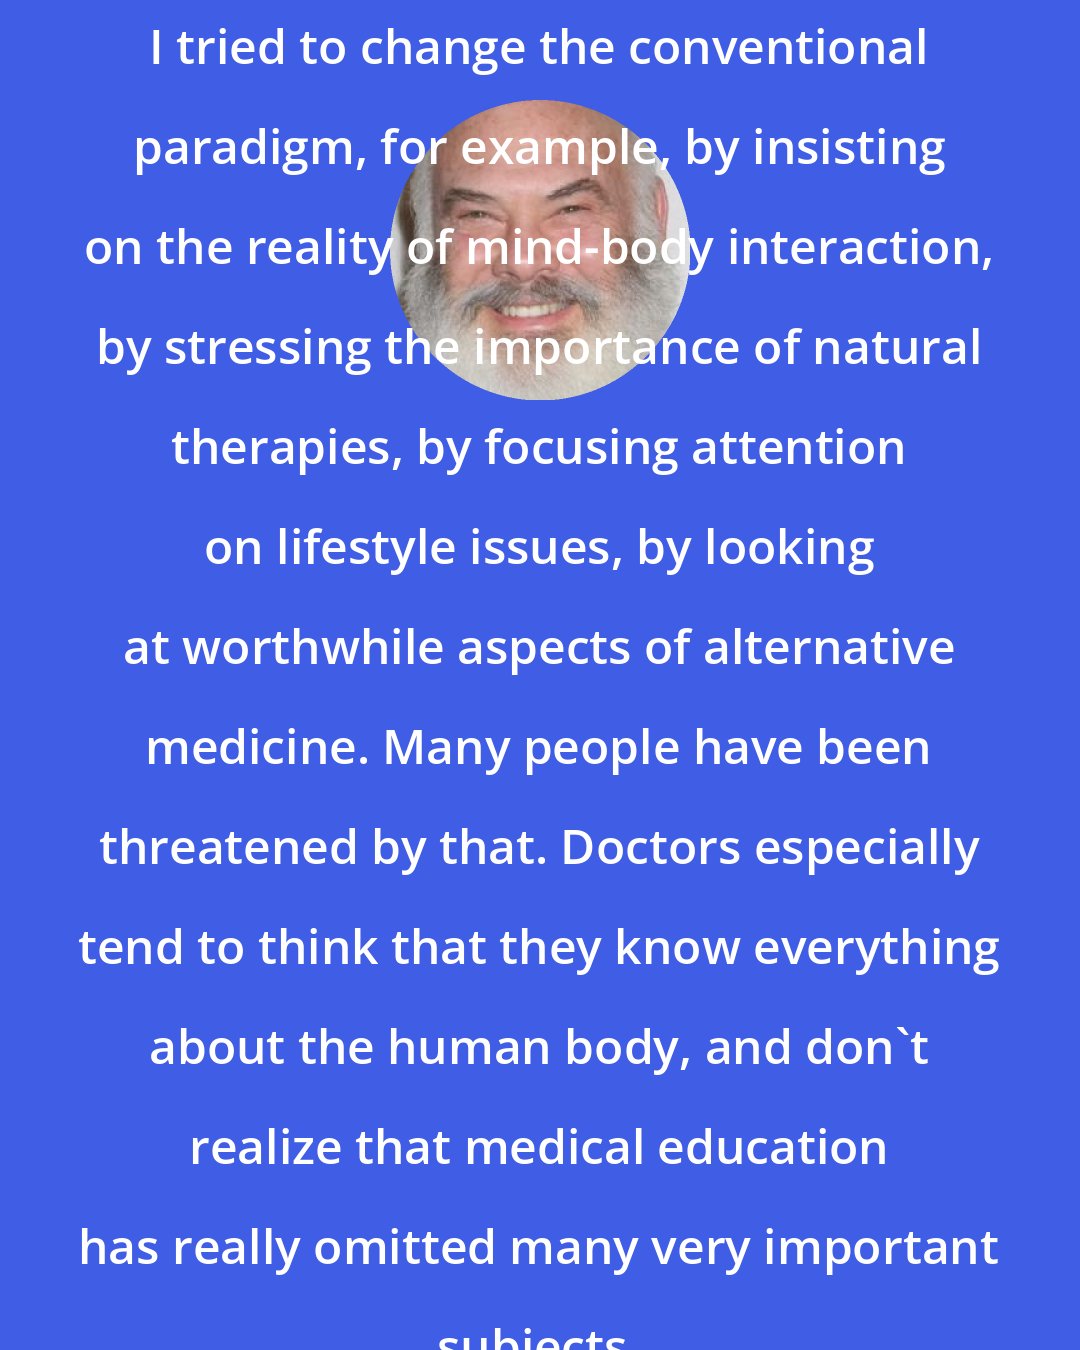 Andrew Weil: I tried to change the conventional paradigm, for example, by insisting on the reality of mind-body interaction, by stressing the importance of natural therapies, by focusing attention on lifestyle issues, by looking at worthwhile aspects of alternative medicine. Many people have been threatened by that. Doctors especially tend to think that they know everything about the human body, and don't realize that medical education has really omitted many very important subjects.